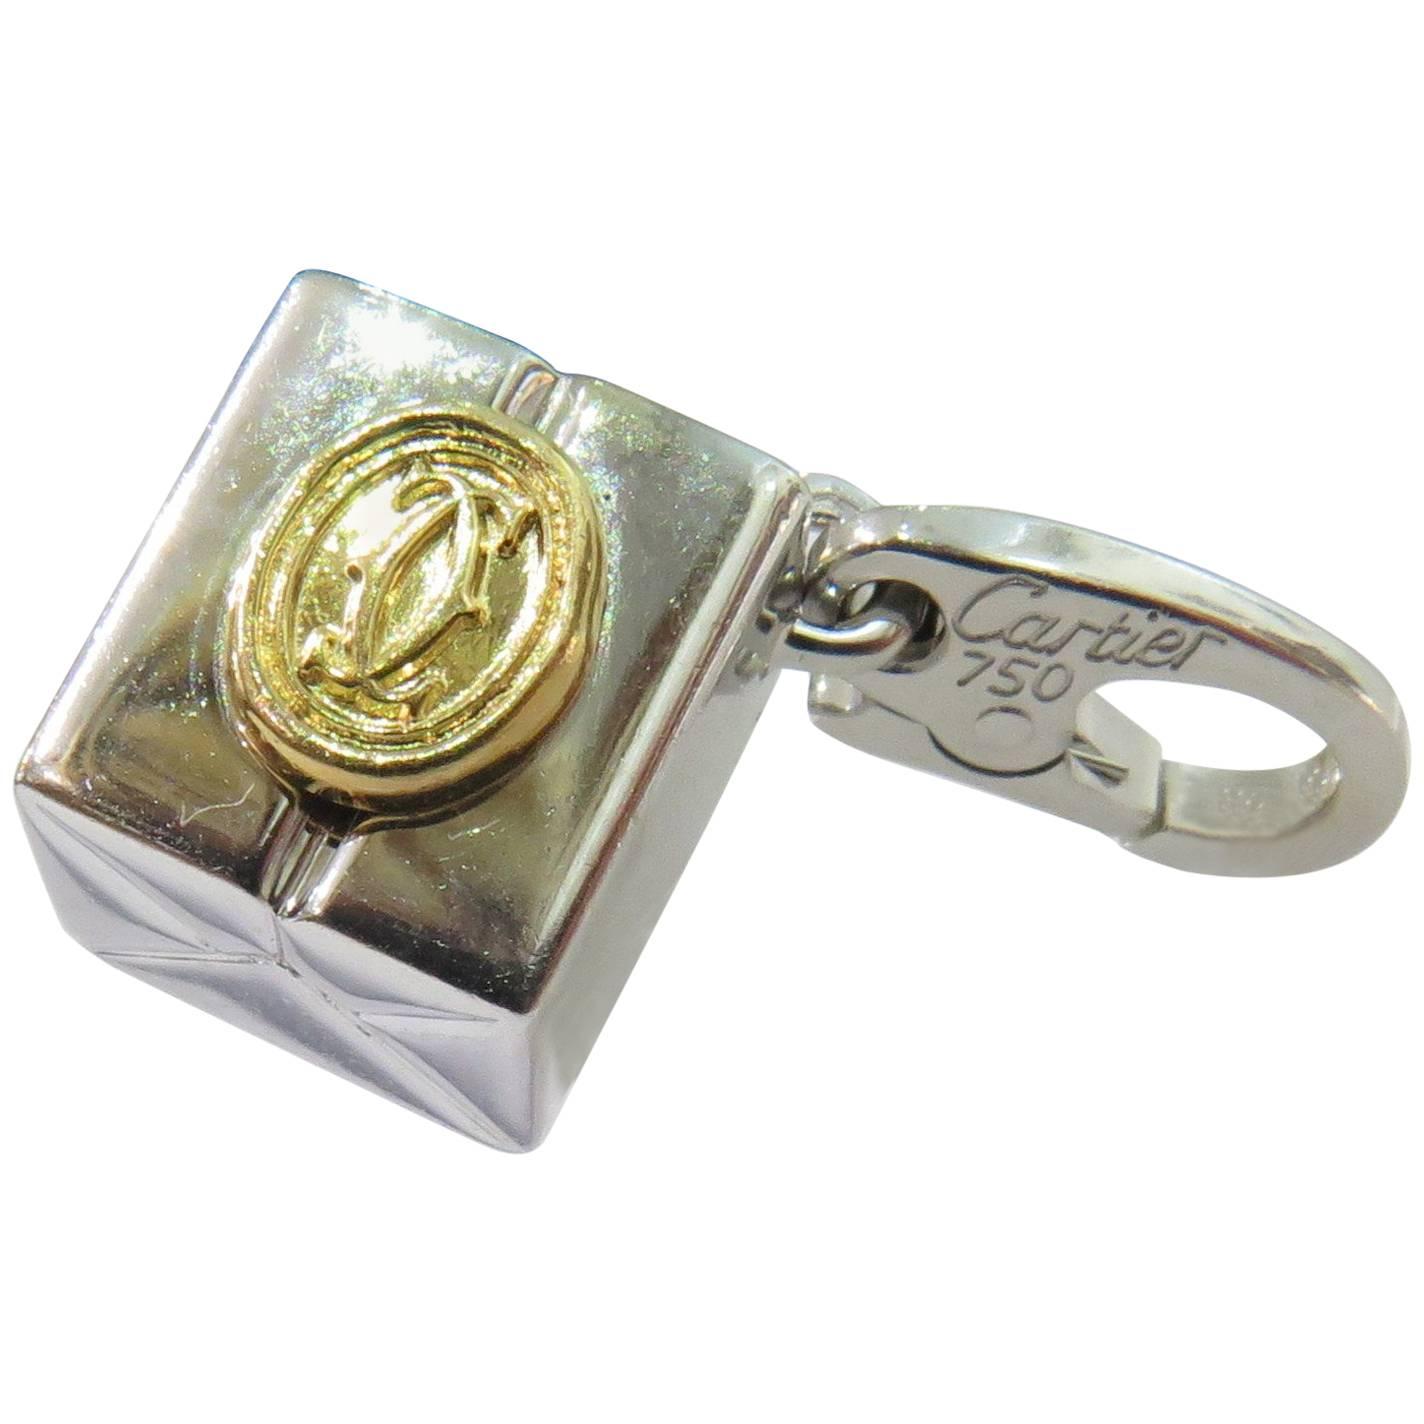 Cartier Double C Logo White and Yellow Gold Gift Box Motif Charm Pendant